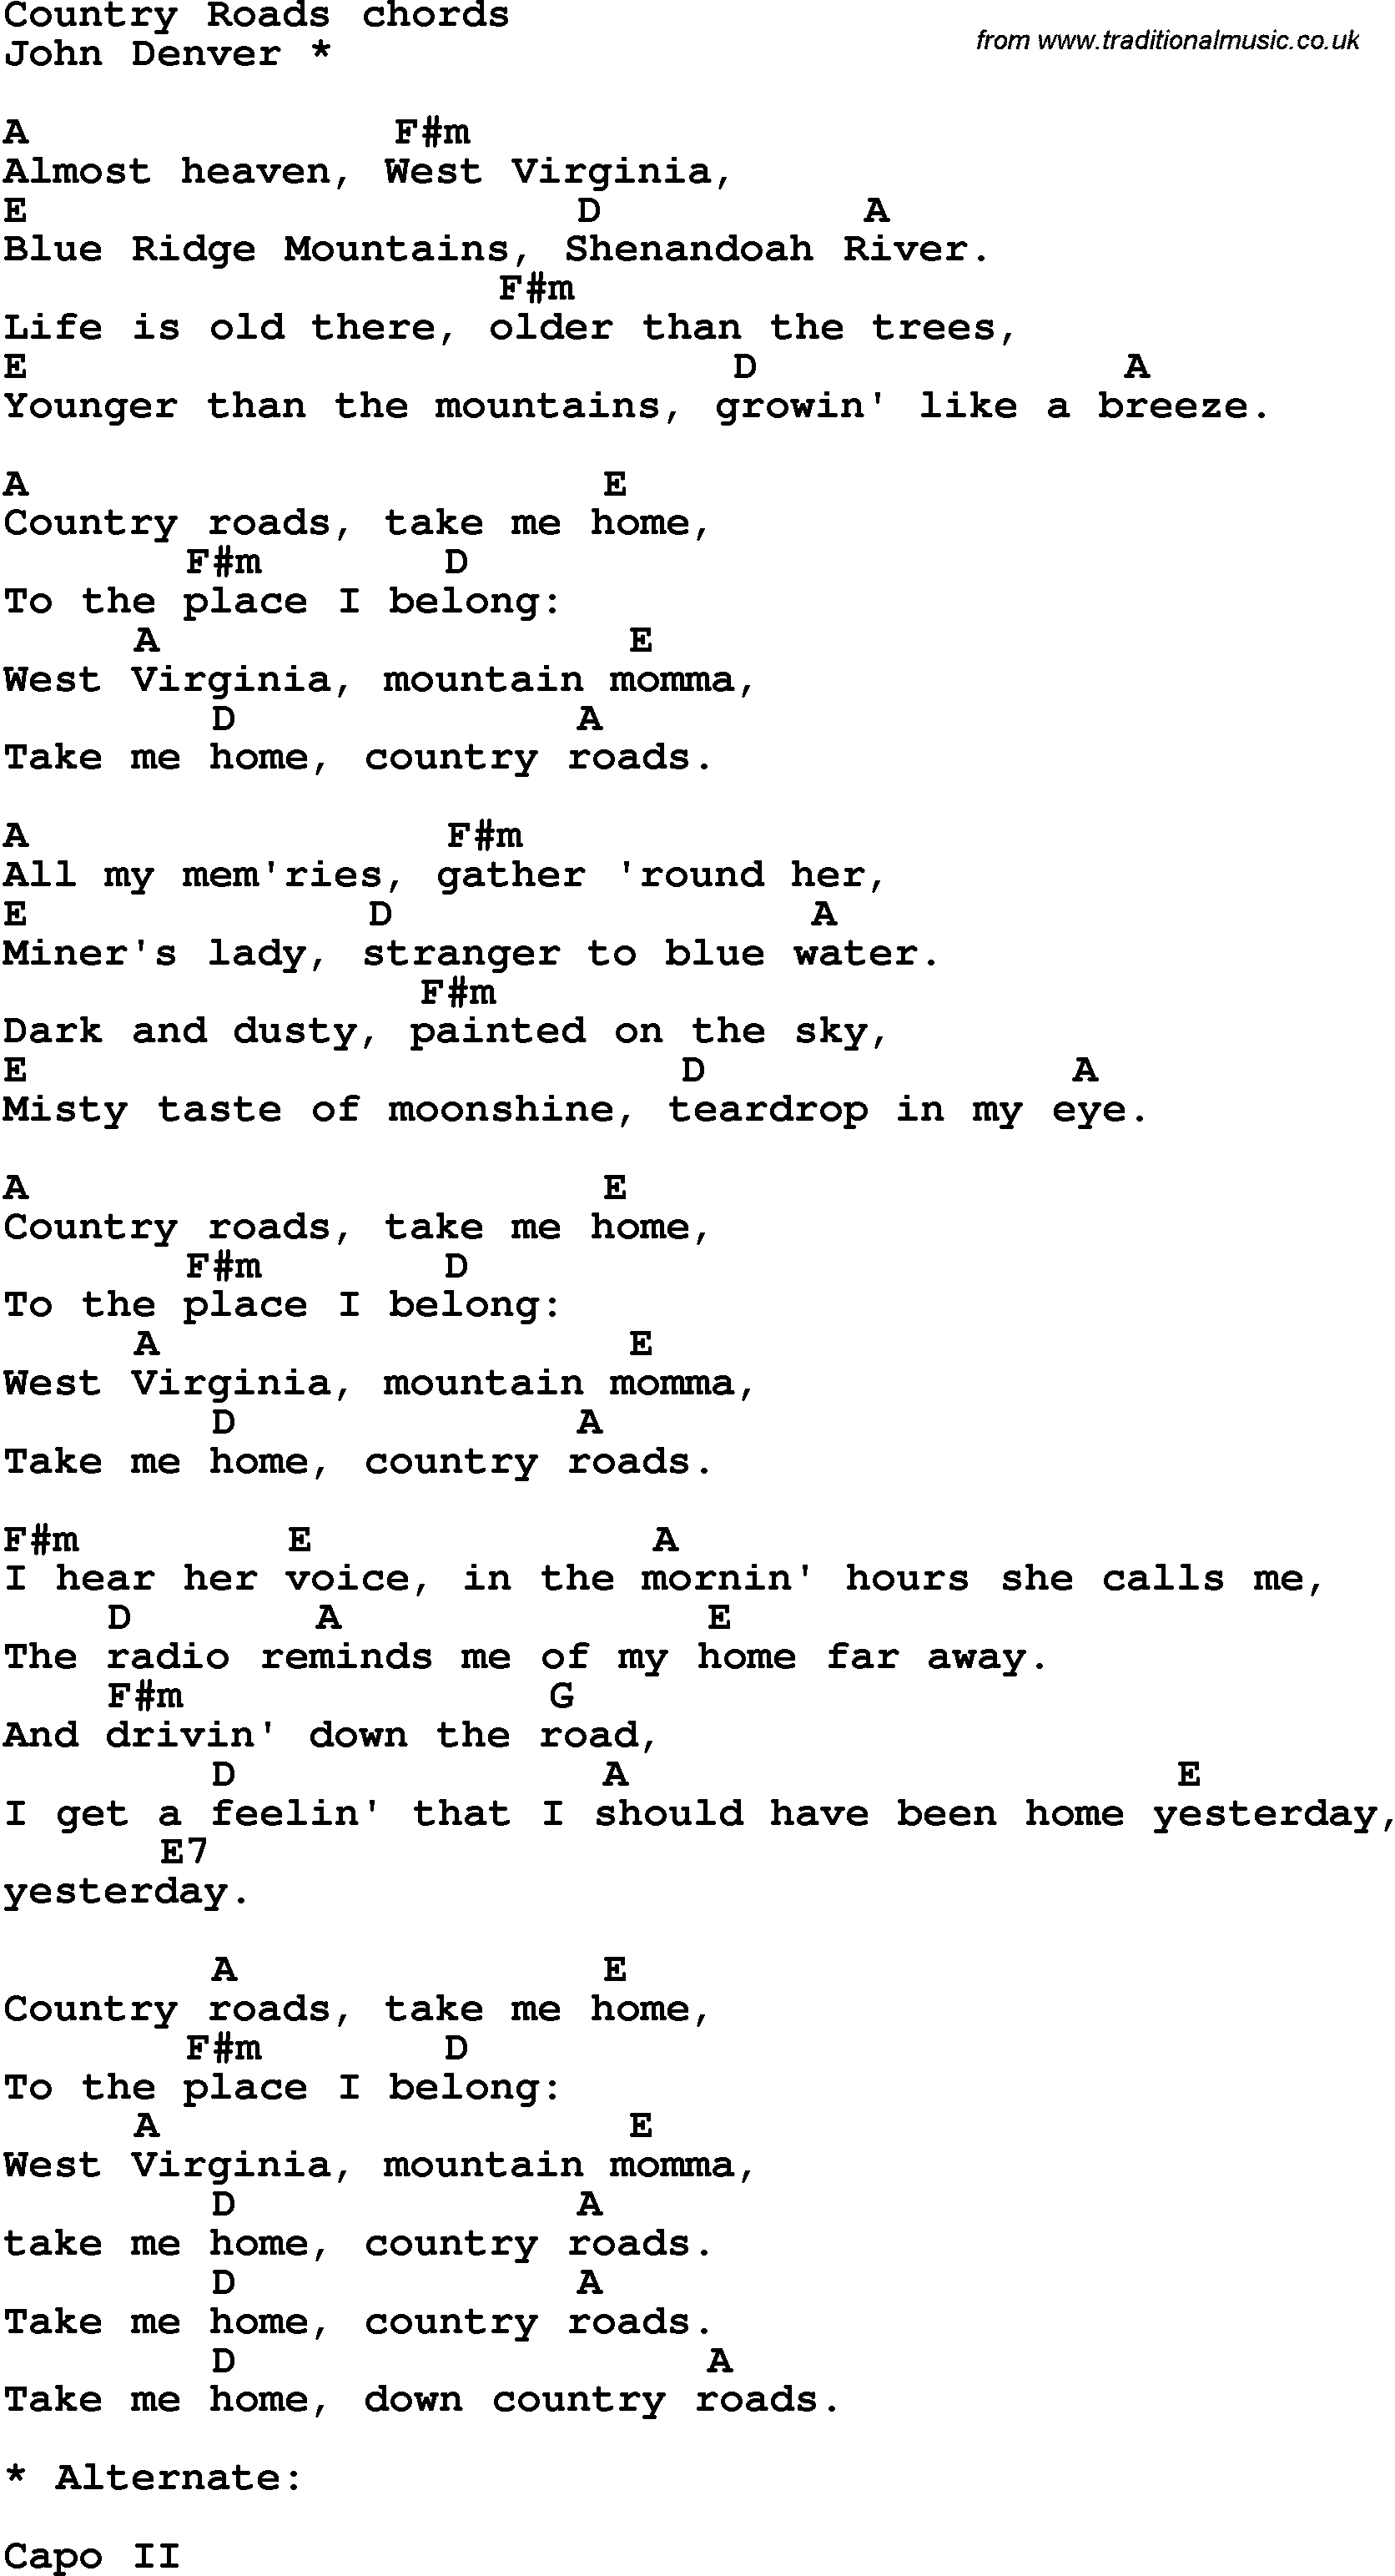 Song Lyrics with guitar chords for Country Roads